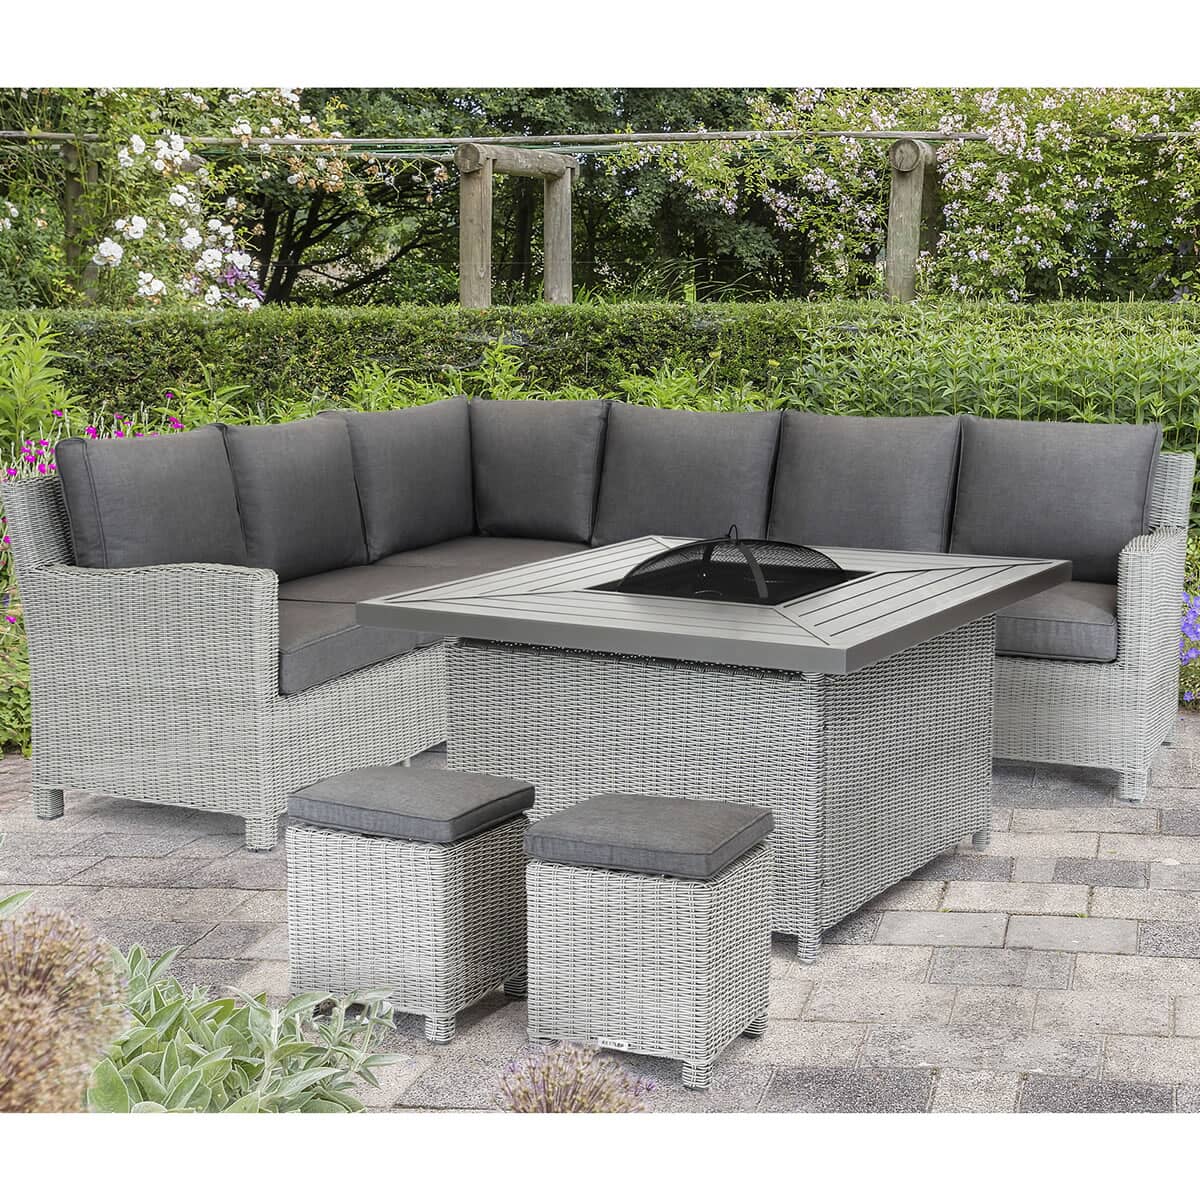 Kettler Palma Corner Set (RH) - Whitewash with Square Charcoal Fire Pit Table